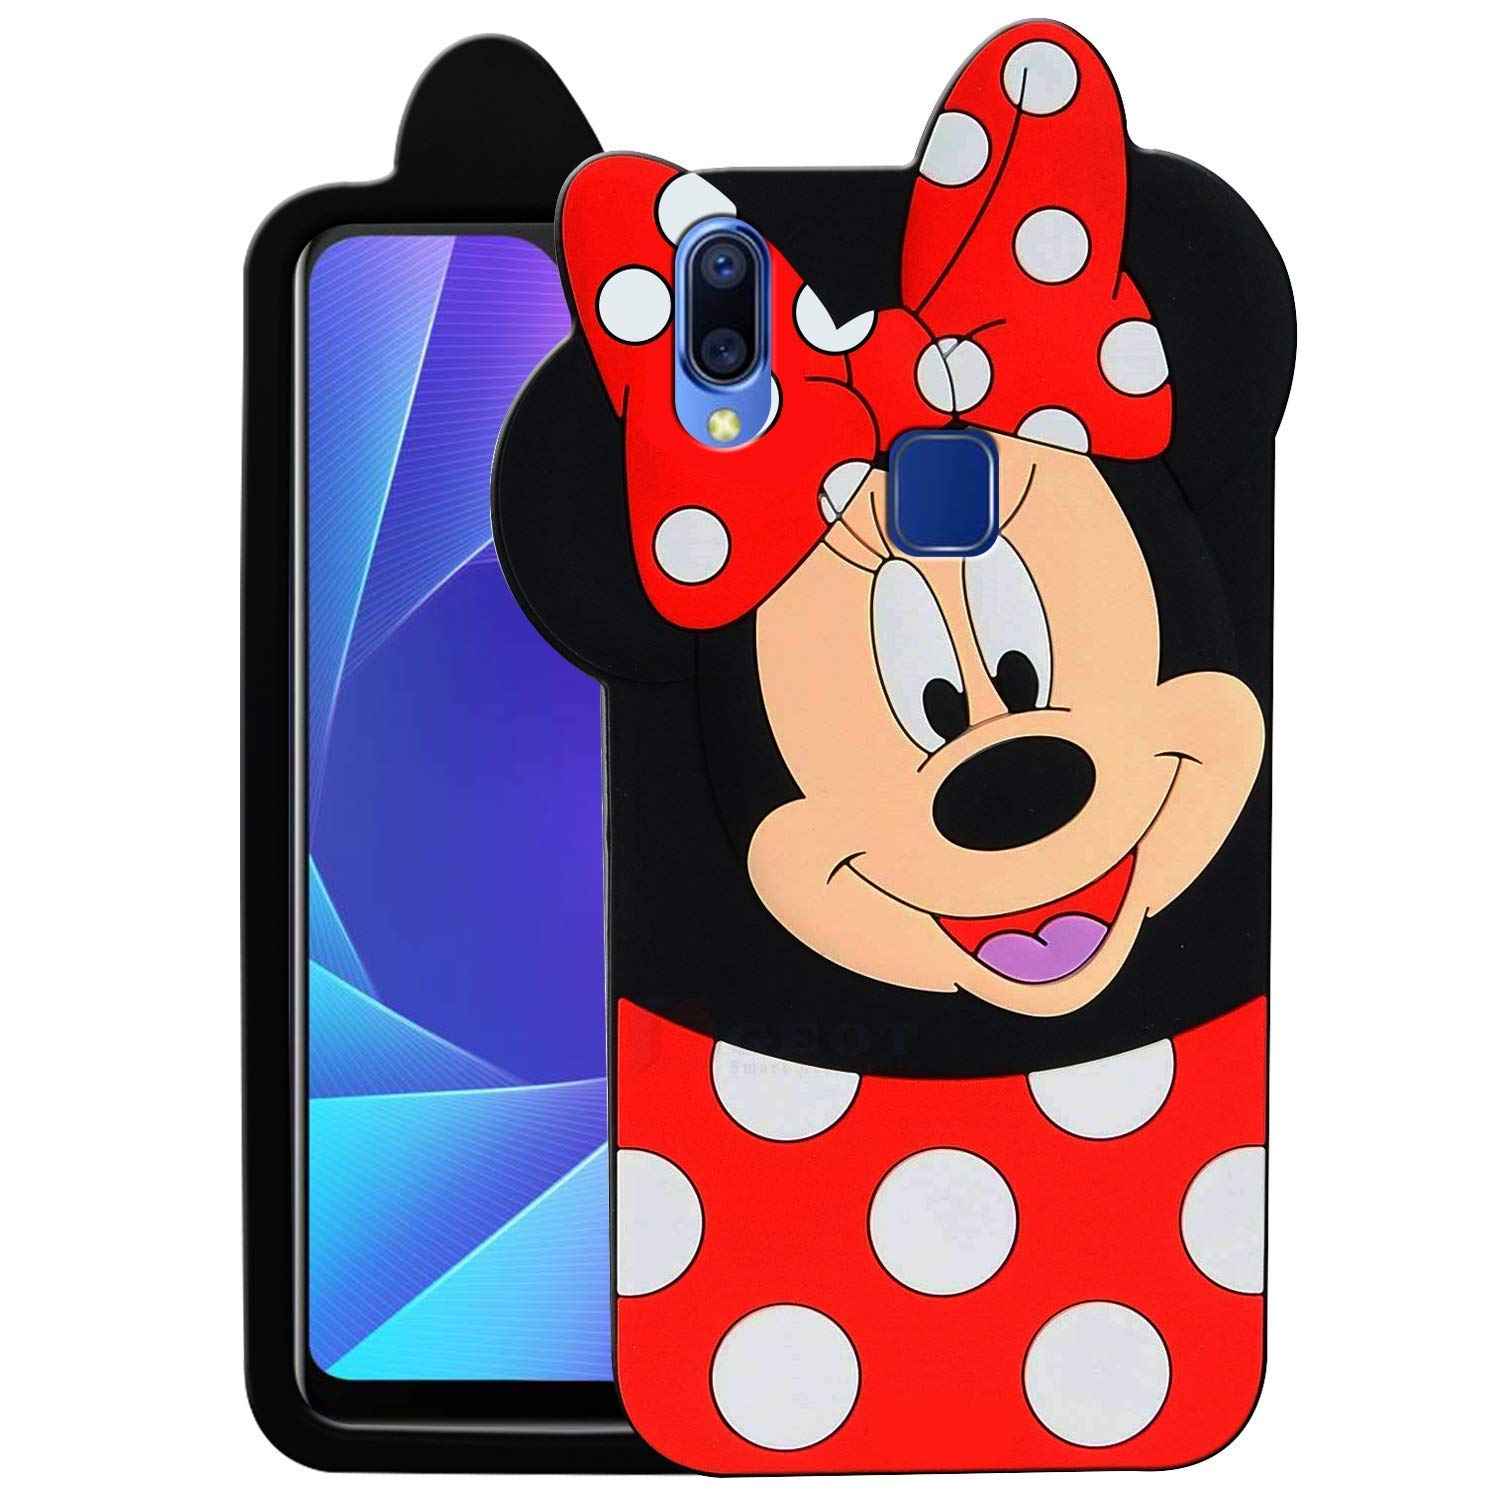 Vivo Y93 / Y95 (Red) 3D Mickey Mouse Rubber Back Covers – Hello Friends